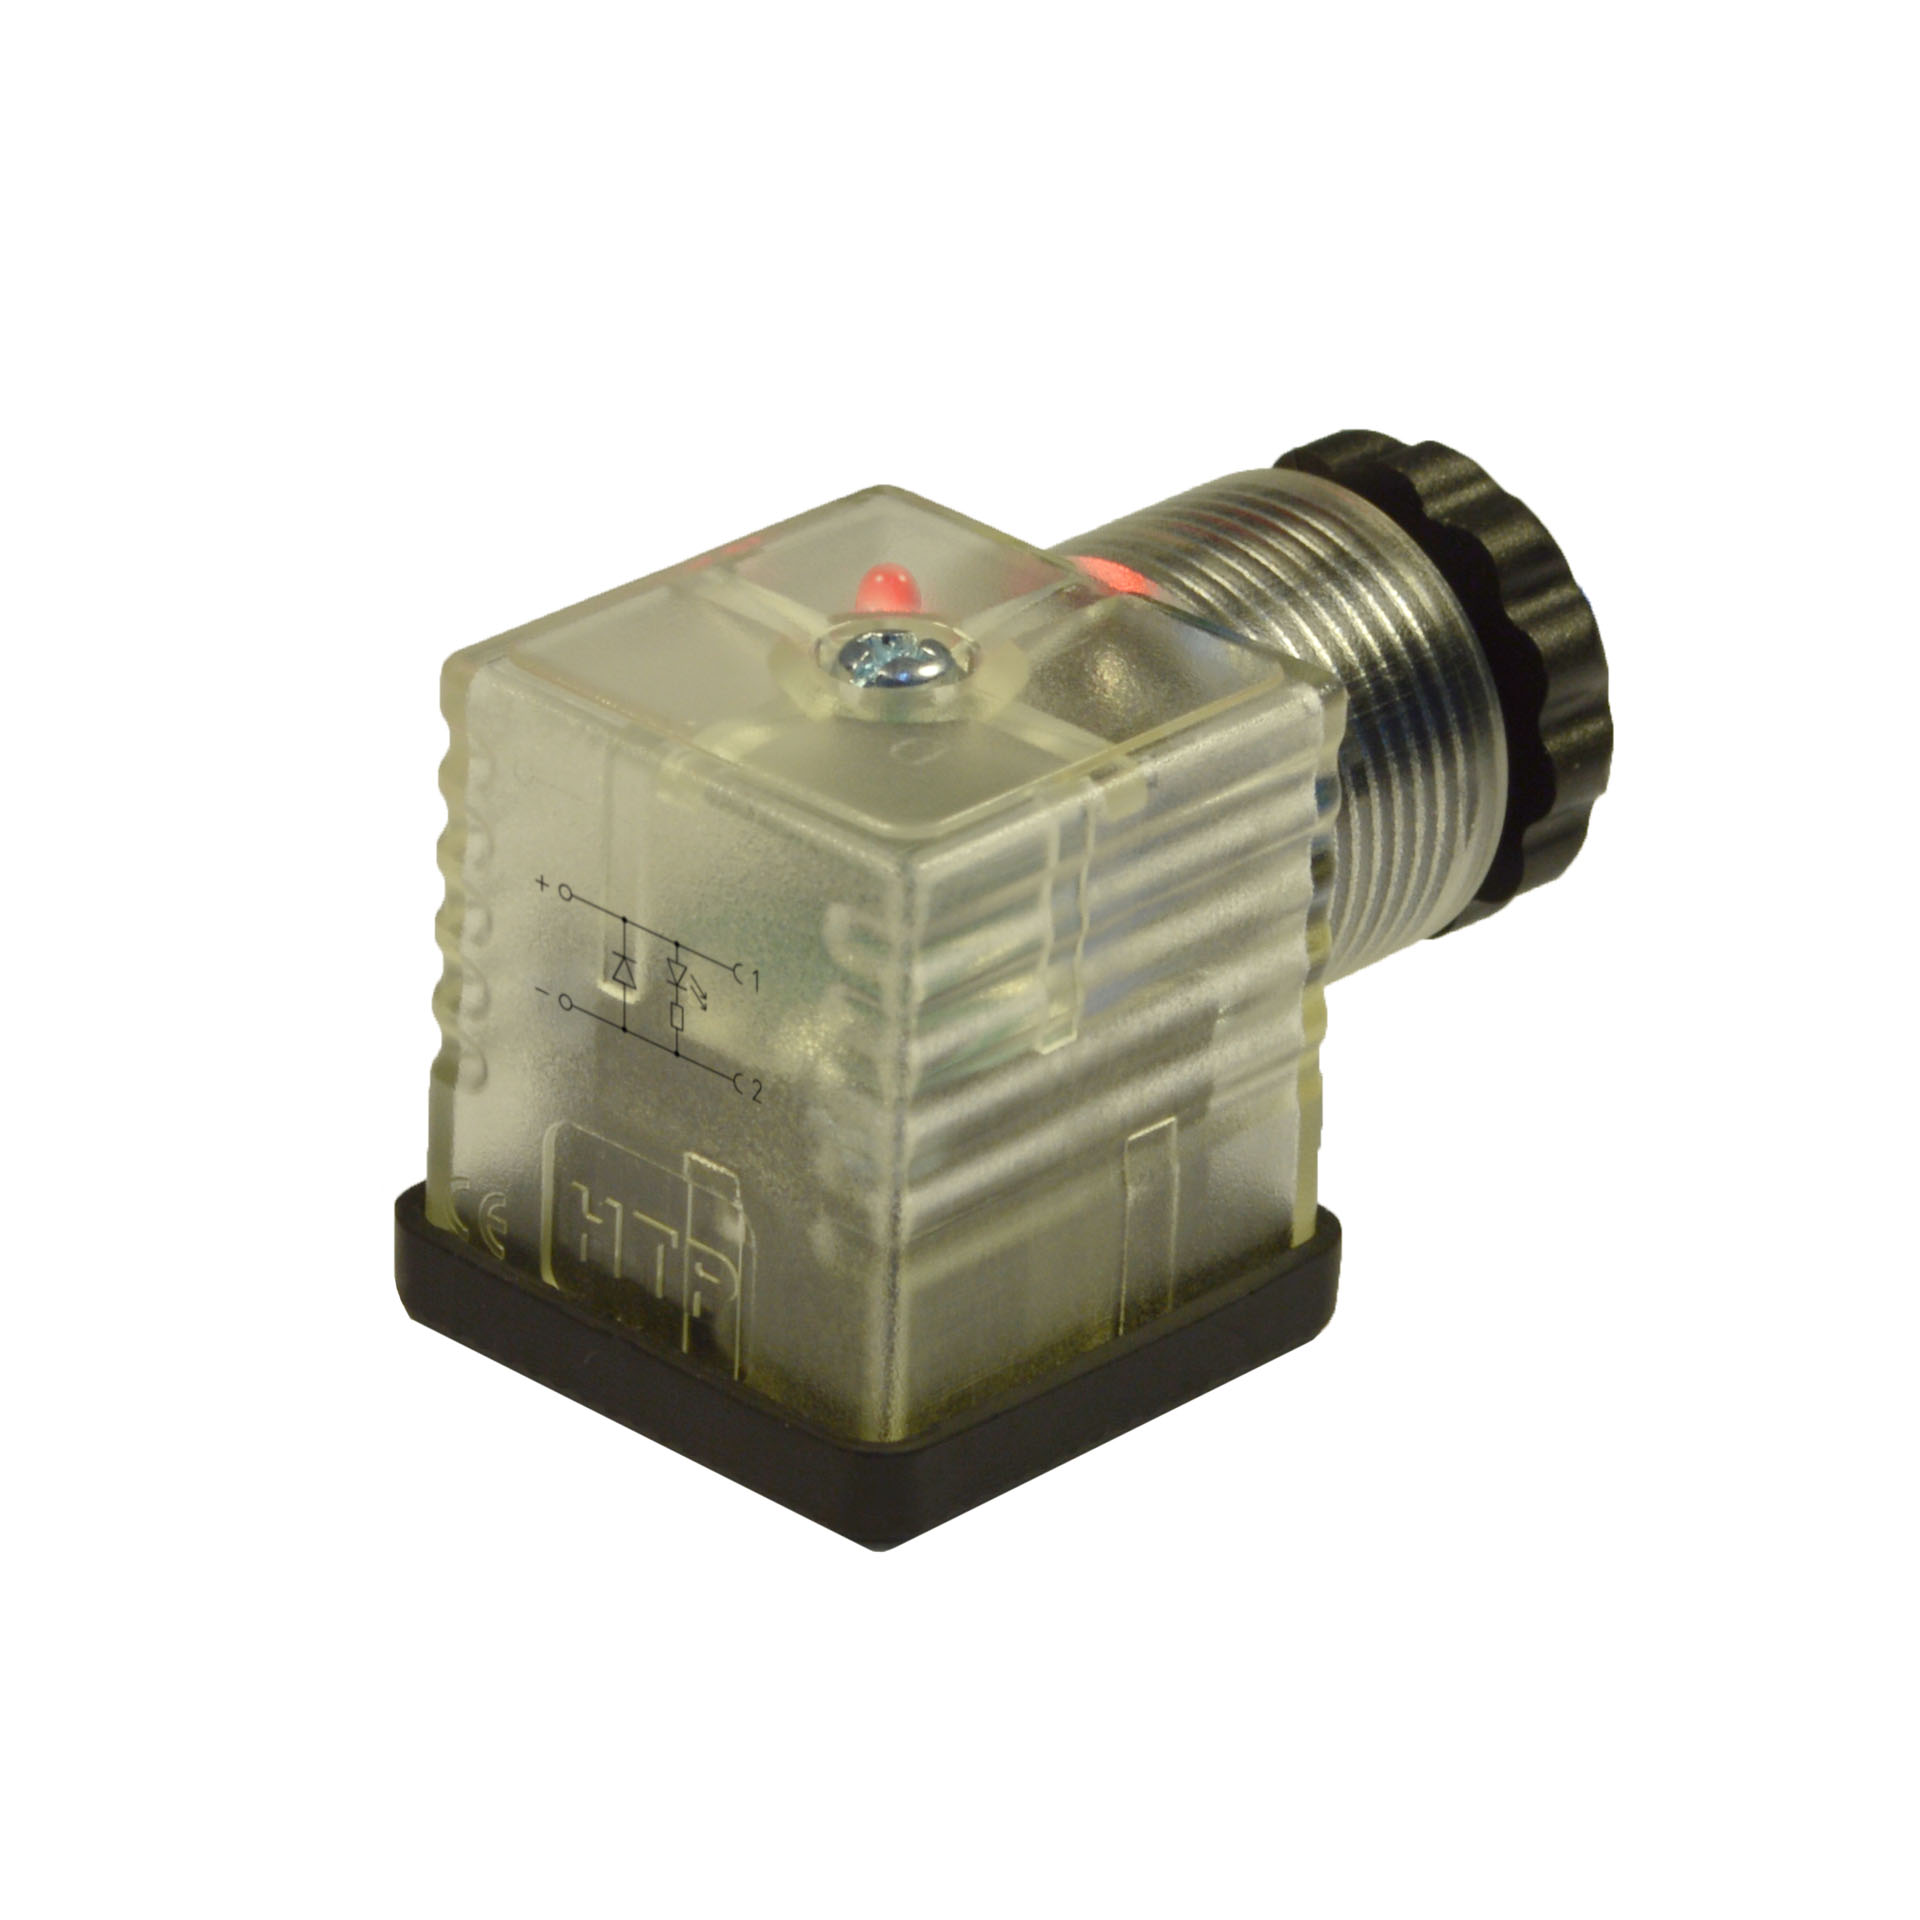 EN175301-803(typeA)field attachable,2p+PE(h.12),Red LED+diode,24VDC,PG9/11unif.